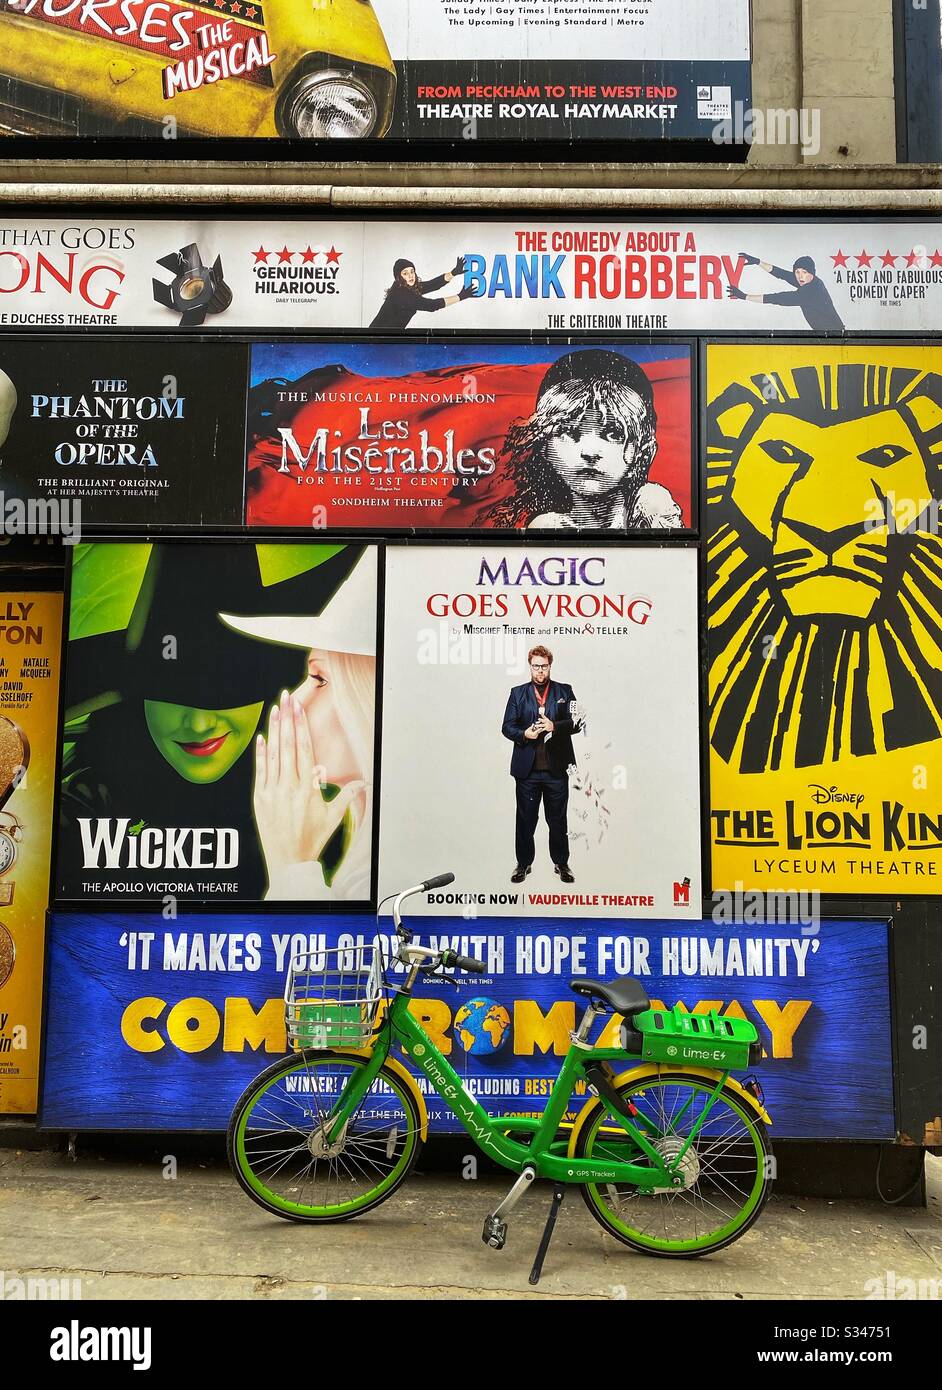 Posters for theatrical products are pictures in London’s west end. Theatrical productions have halted due to the COVID-19 outbreak on March 17 2020 Stock Photo